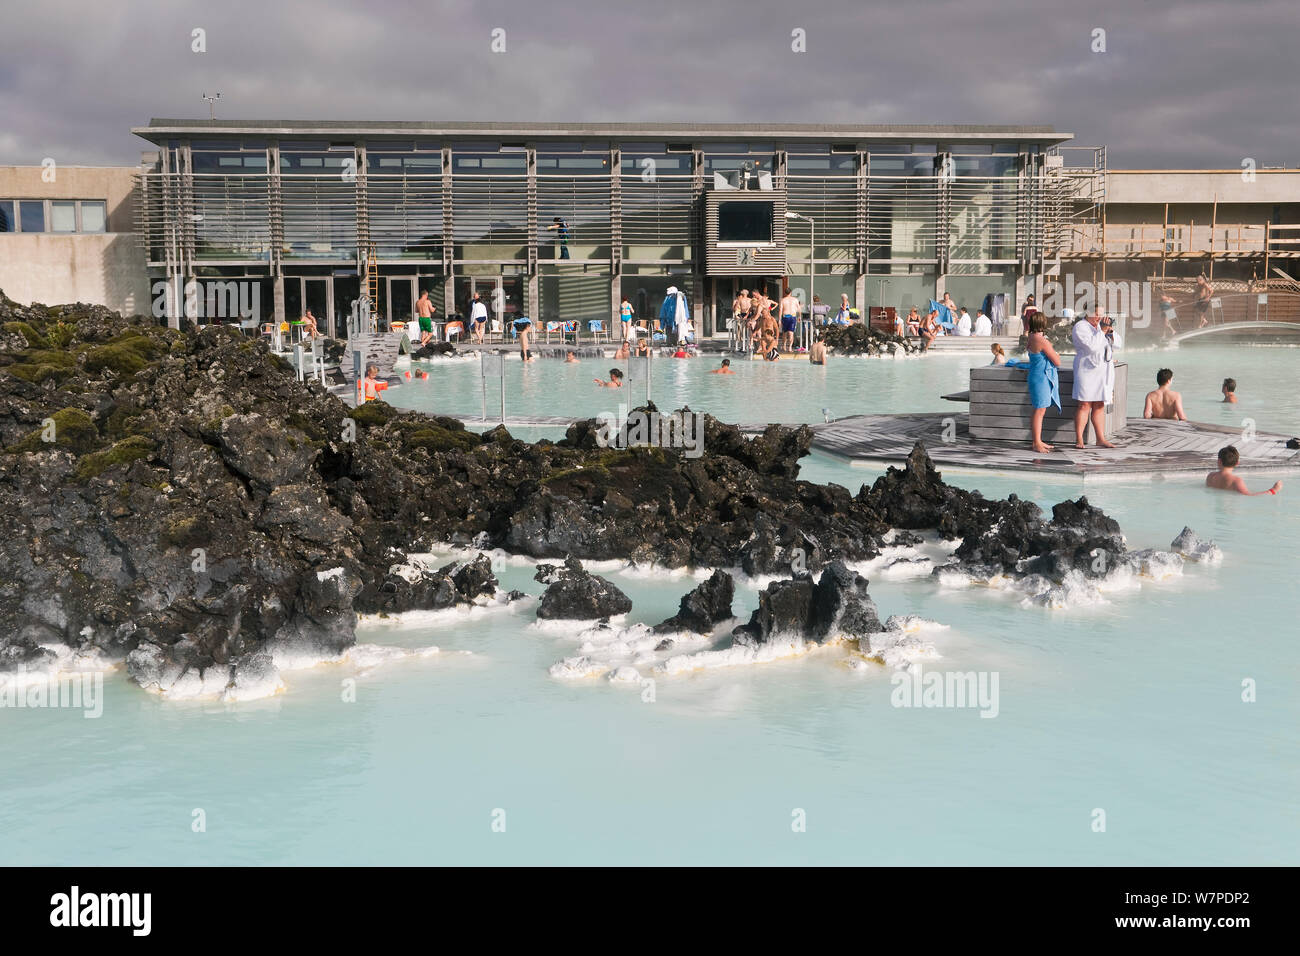 The Blue Lagoon, Iceland's most famous tourist attraction is located among the black lava flows outside Reykjavik. The geothermal spa owes its existence to the Svartsengi geothermal power plant powered by superheated seawater drawn from deep bore holes in the lava. The milky blue waters are rich in blue-green algae (cyanobacteria), mineral salts and fine silica mud. Reykjavik, Iceland 2006 Stock Photo